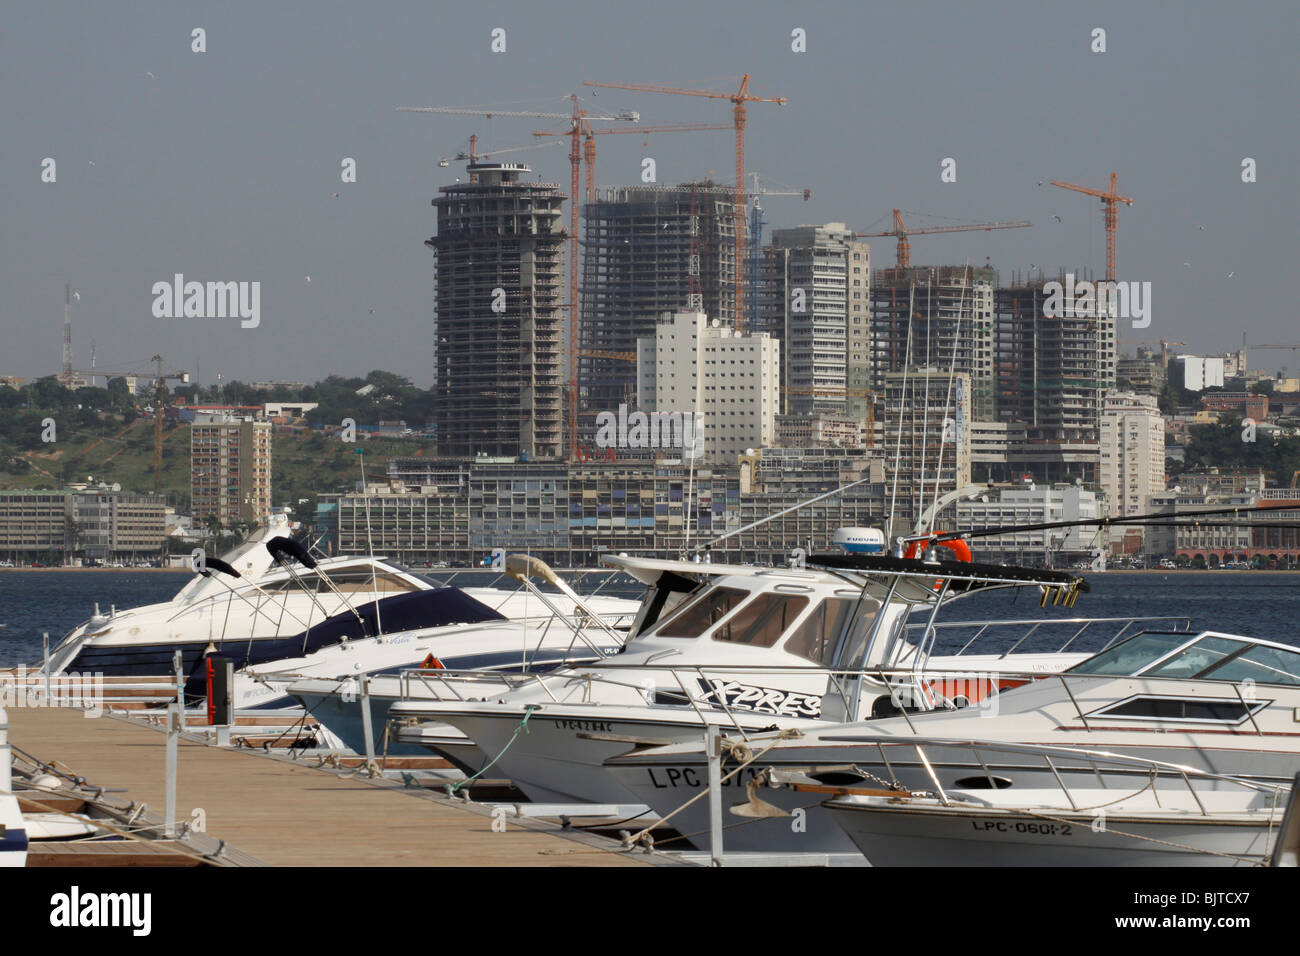 The Sonangol oil company headquarters seen from across the harbour from the Ilha. Luanda. Angola. Africa Stock Photo